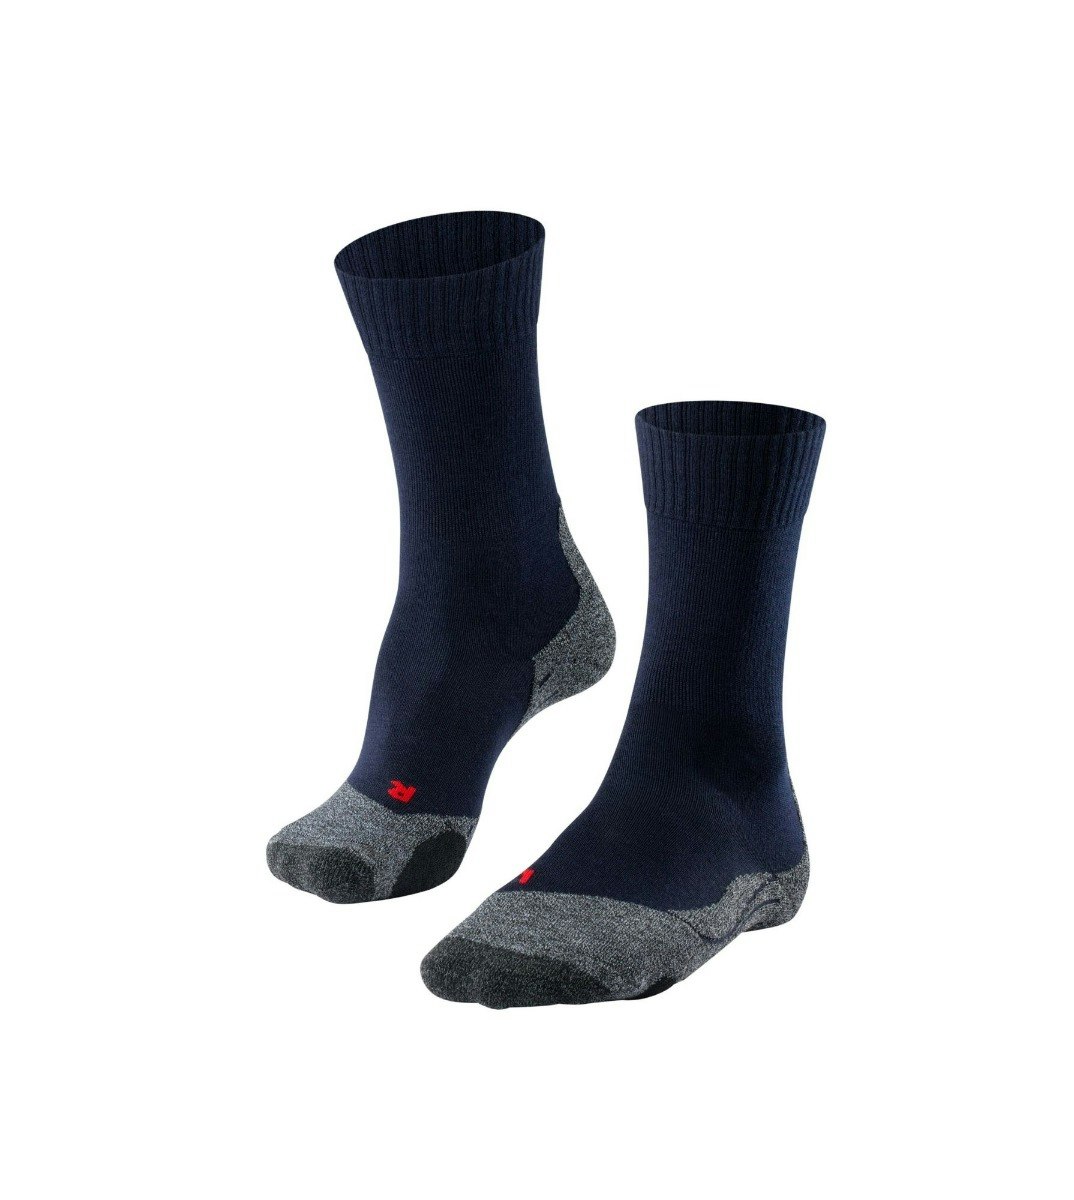  FALKE Unisex 4 GRIP Athletic Socks, Mid Calf, Sole Grips, Light  Weight Sport Sock, Breathable Quick Dry, Lyocell, 1 Pair : Clothing, Shoes  & Jewelry